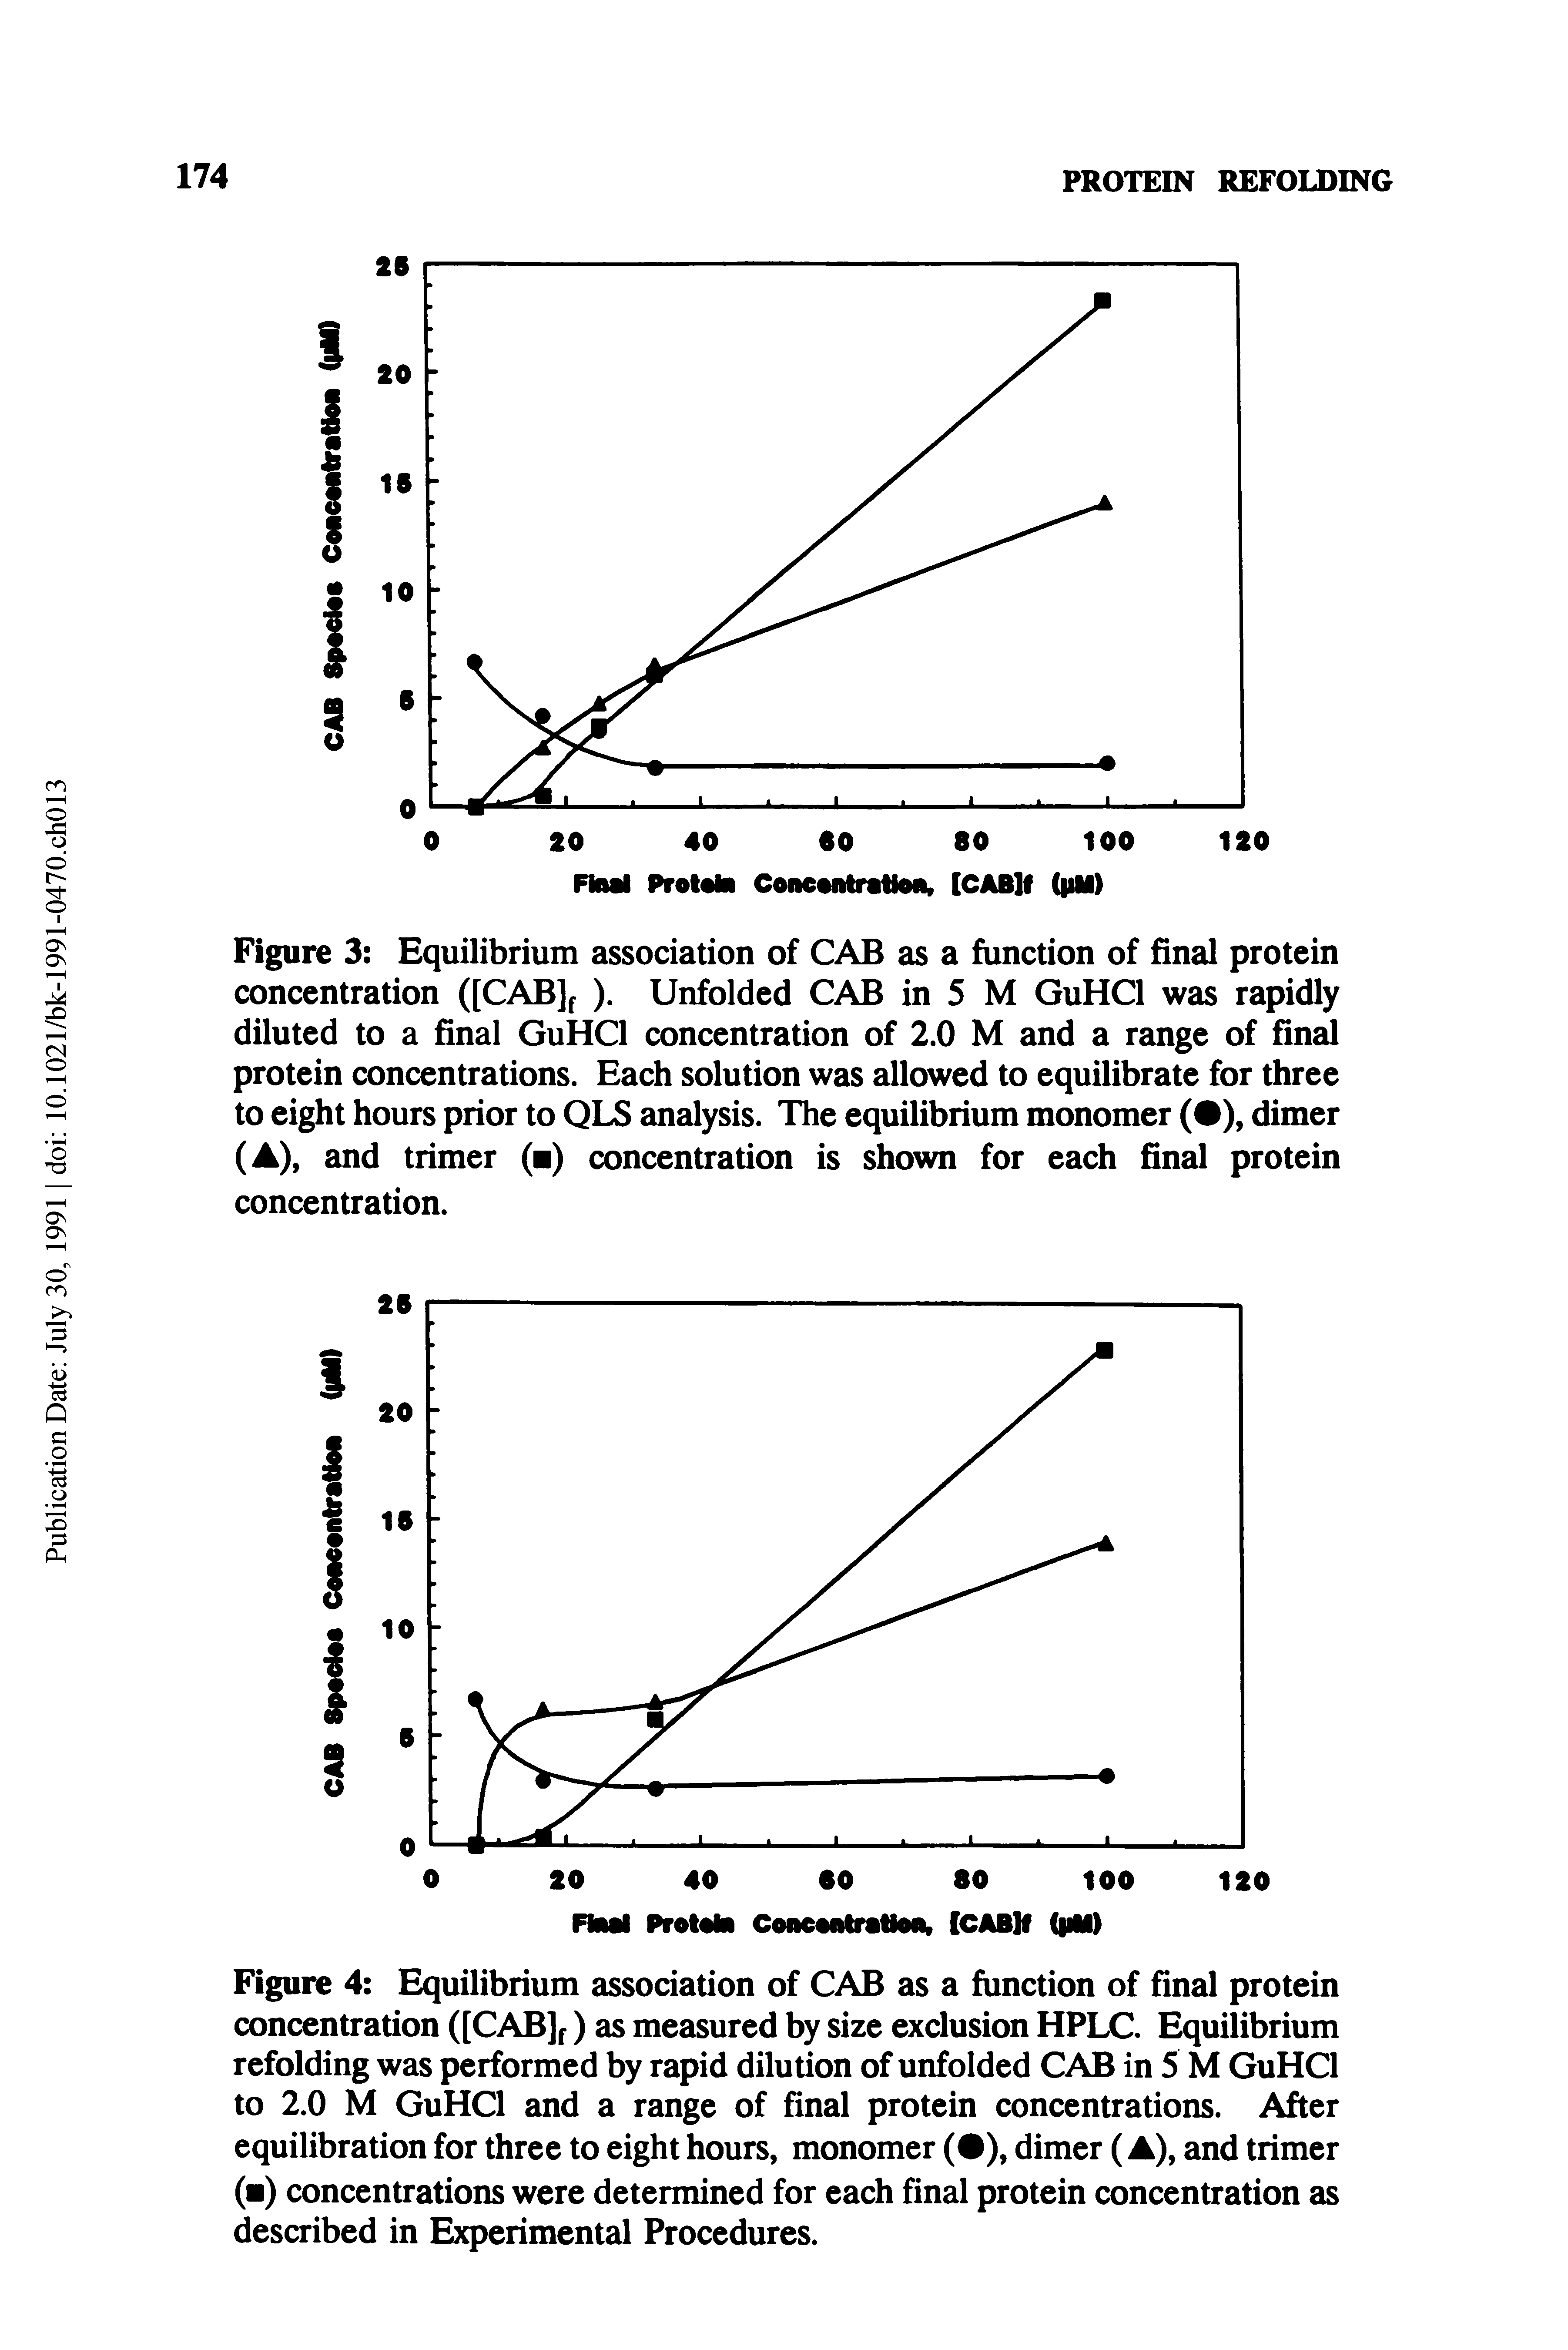 Figure 4 Equilibrium association of CAB as a function of final protein concentration ([CAB]f) as measured by size exclusion HPLC. Equilibrium refolding was performed by rapid dilution of unfolded CAB in 5 M GuHCl to 2.0 M GuHCl and a range of final protein concentrations. After equilibration for three to eight hours, monomer ( ), dimer (A), and trimer ( ) concentrations were determined for each final protein concentration as described in Experimental Procedures.